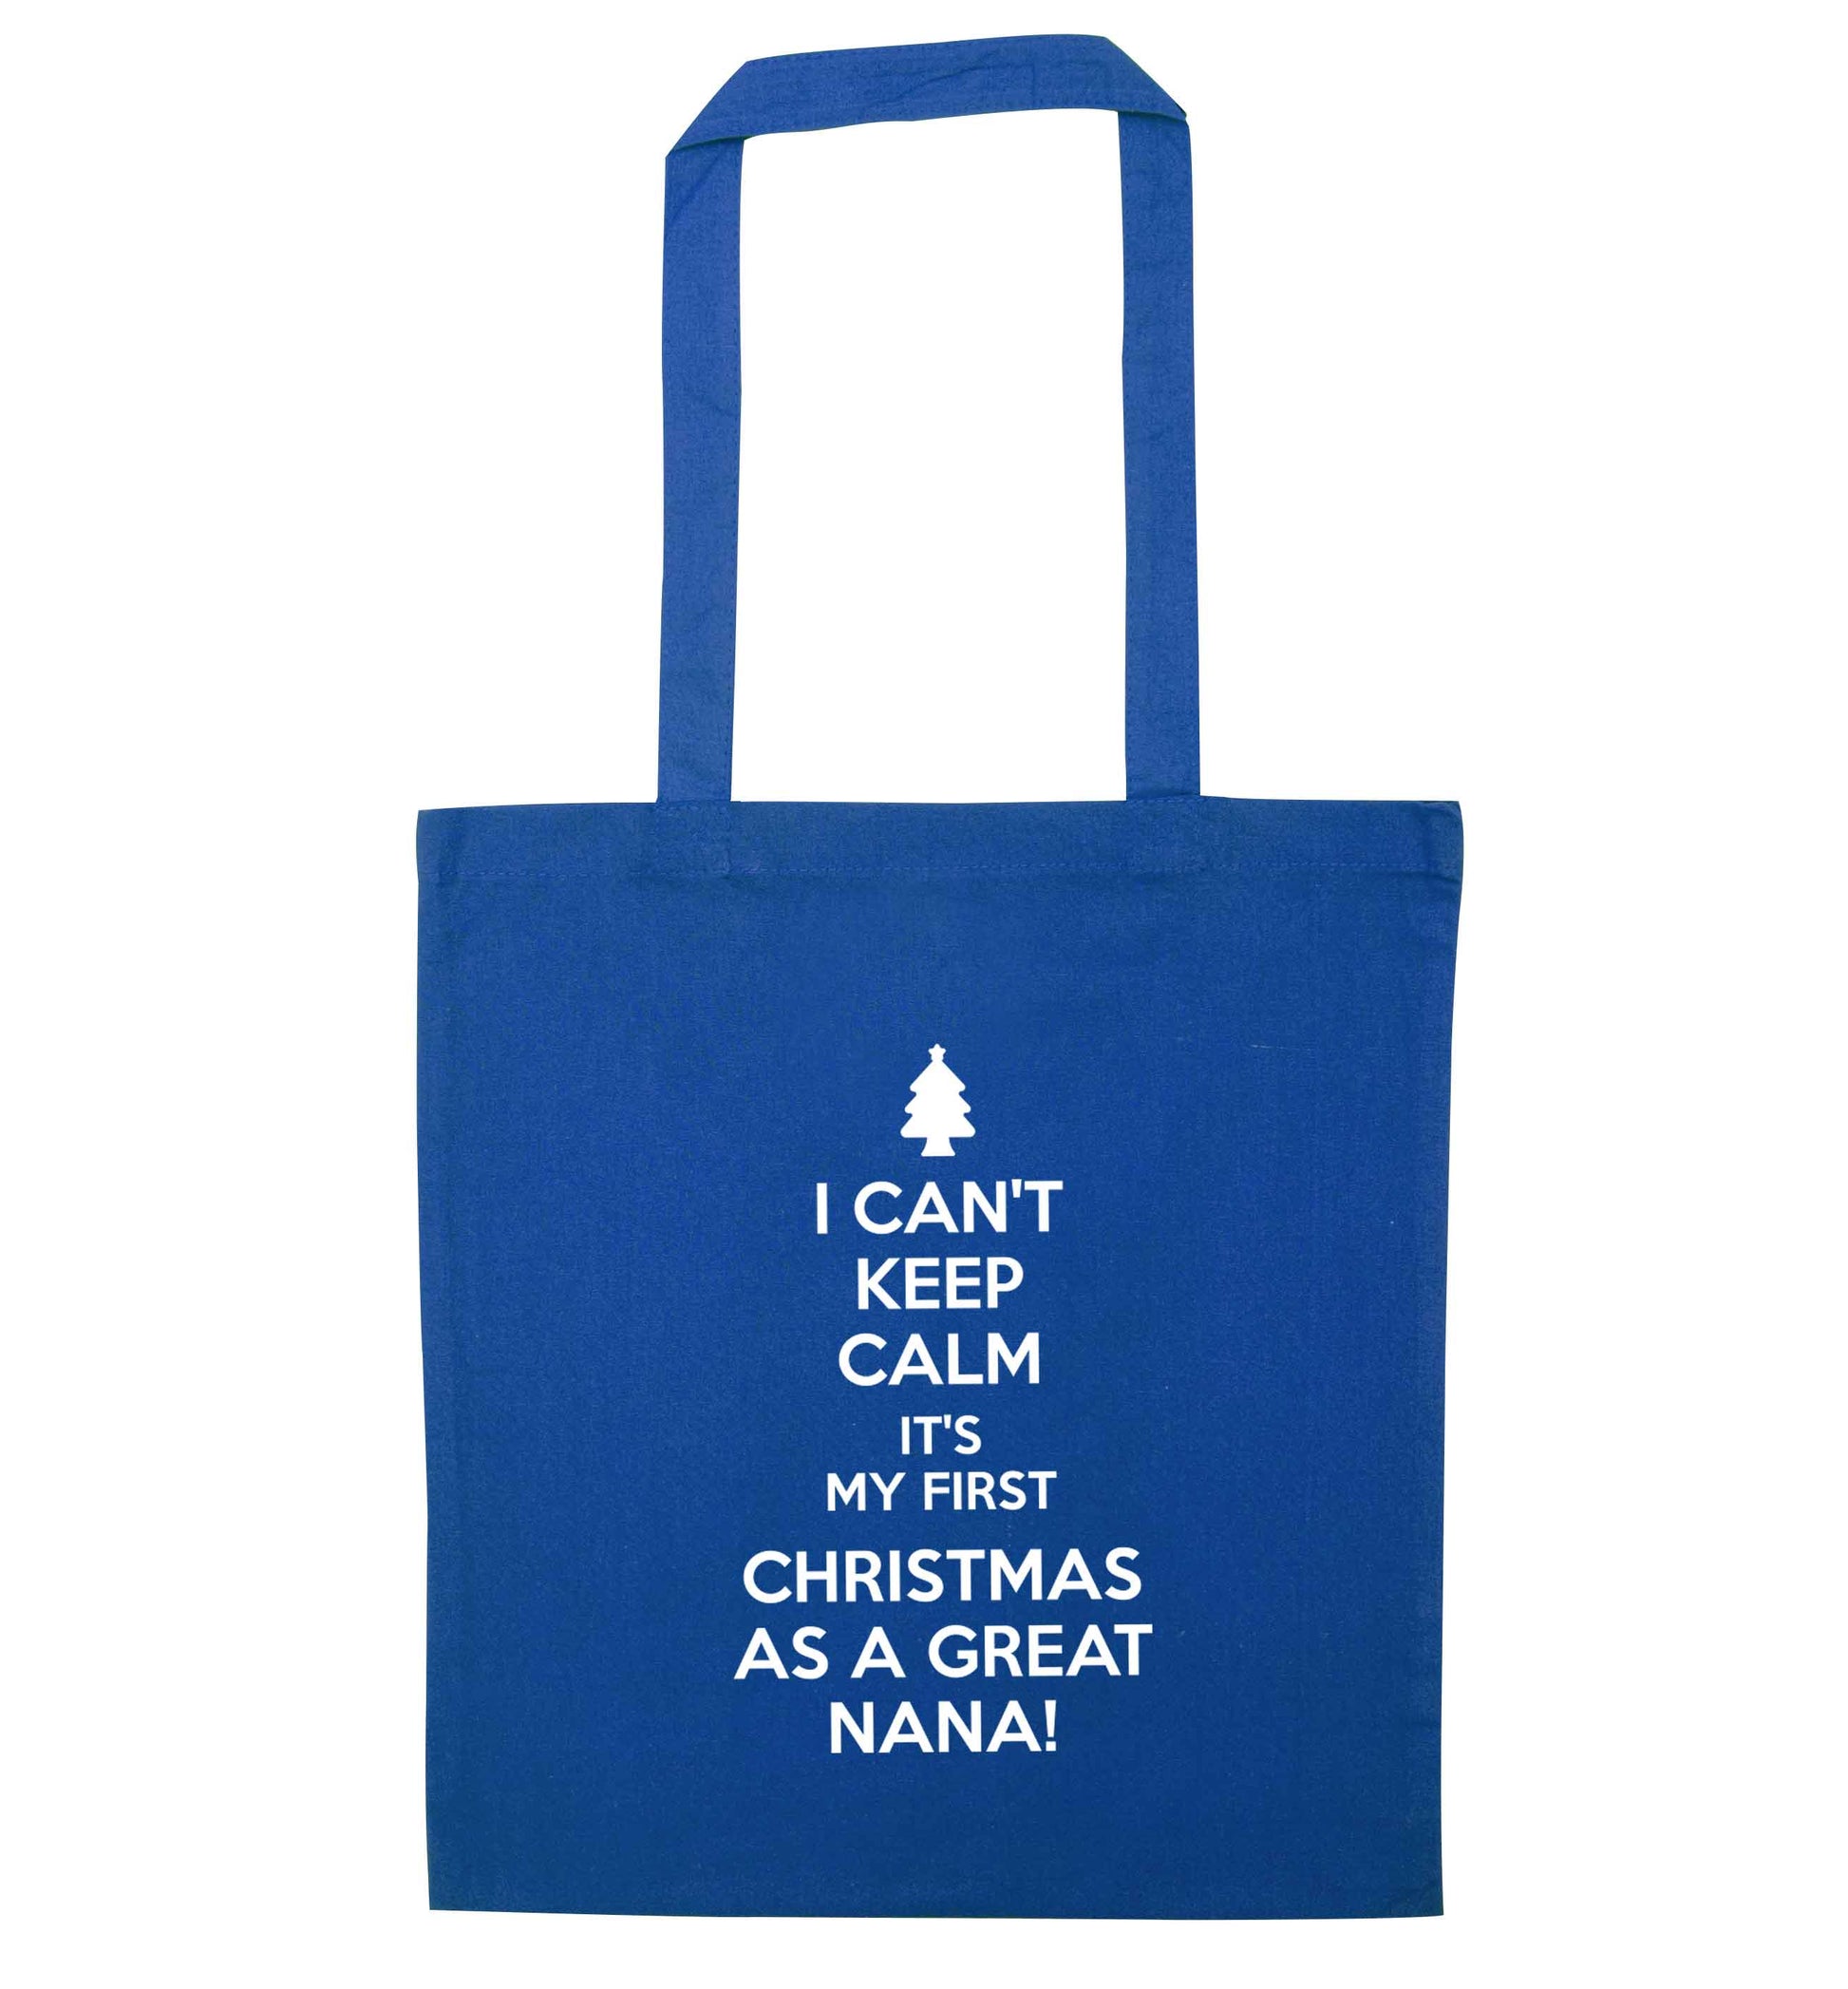 I can't keep calm it's my first Christmas as a great nana! blue tote bag